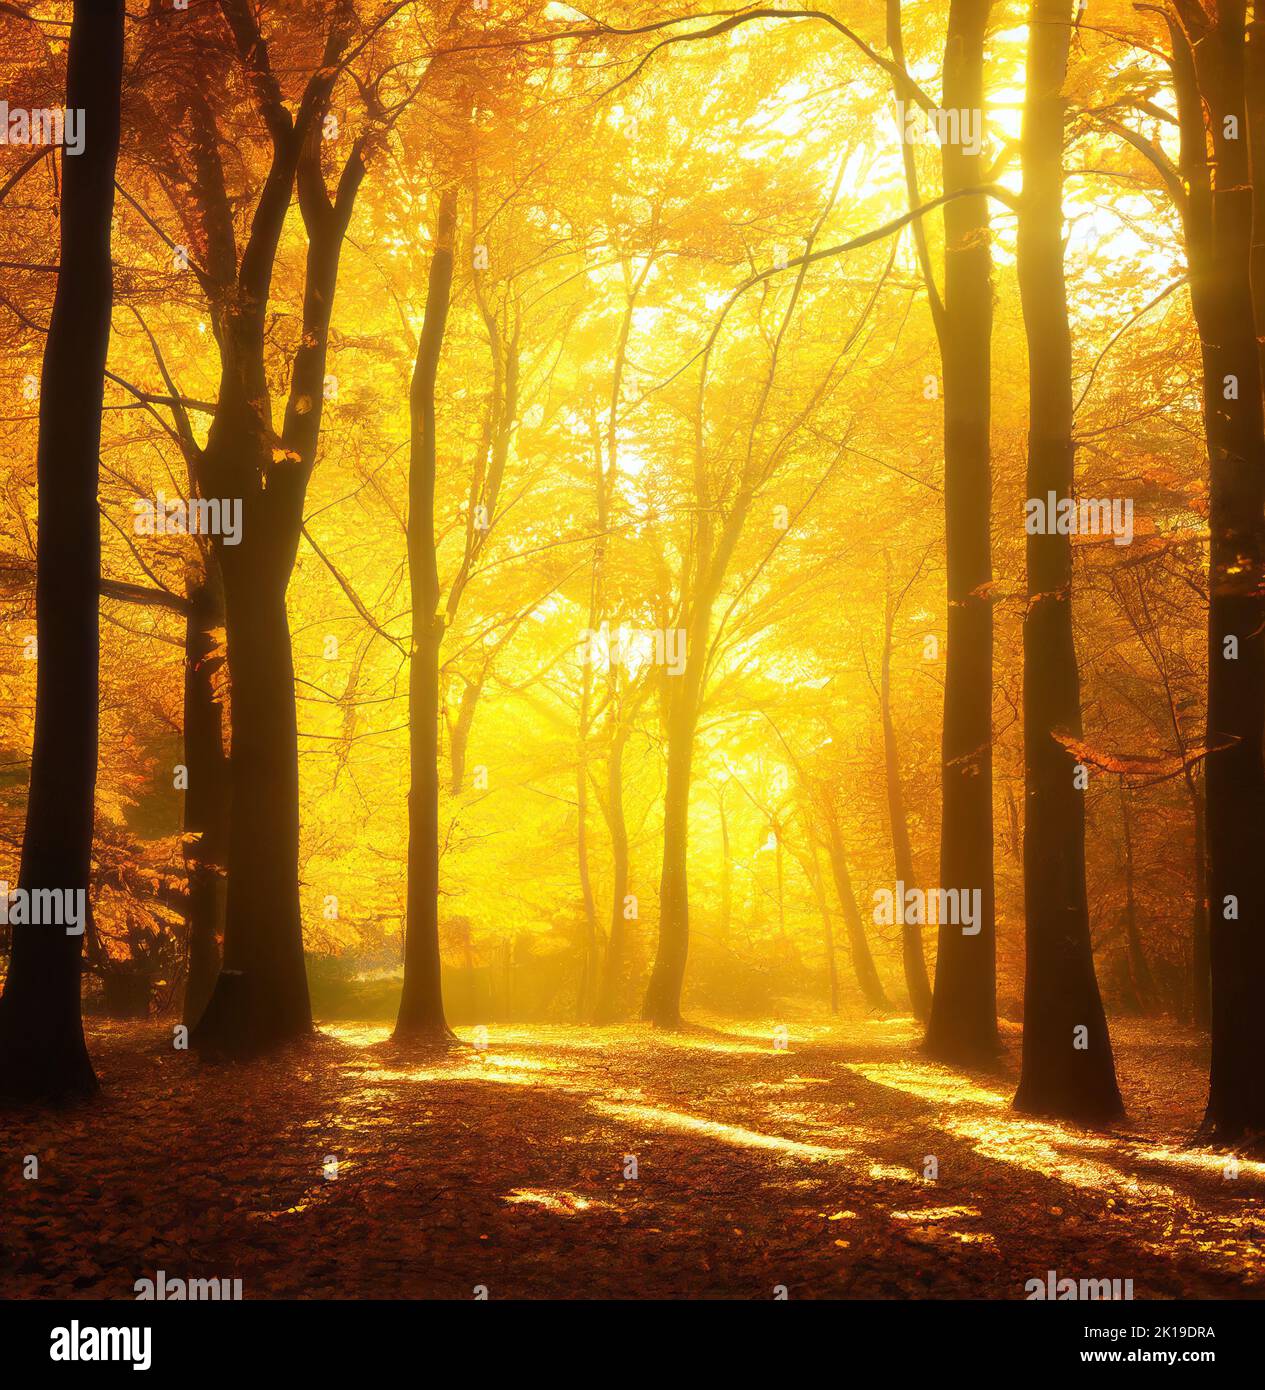 Enchanted golden sunlight in autumn forest, backlit tree silhouettes and yellow foliage. Digital illustration based on render by neural network Stock Photo